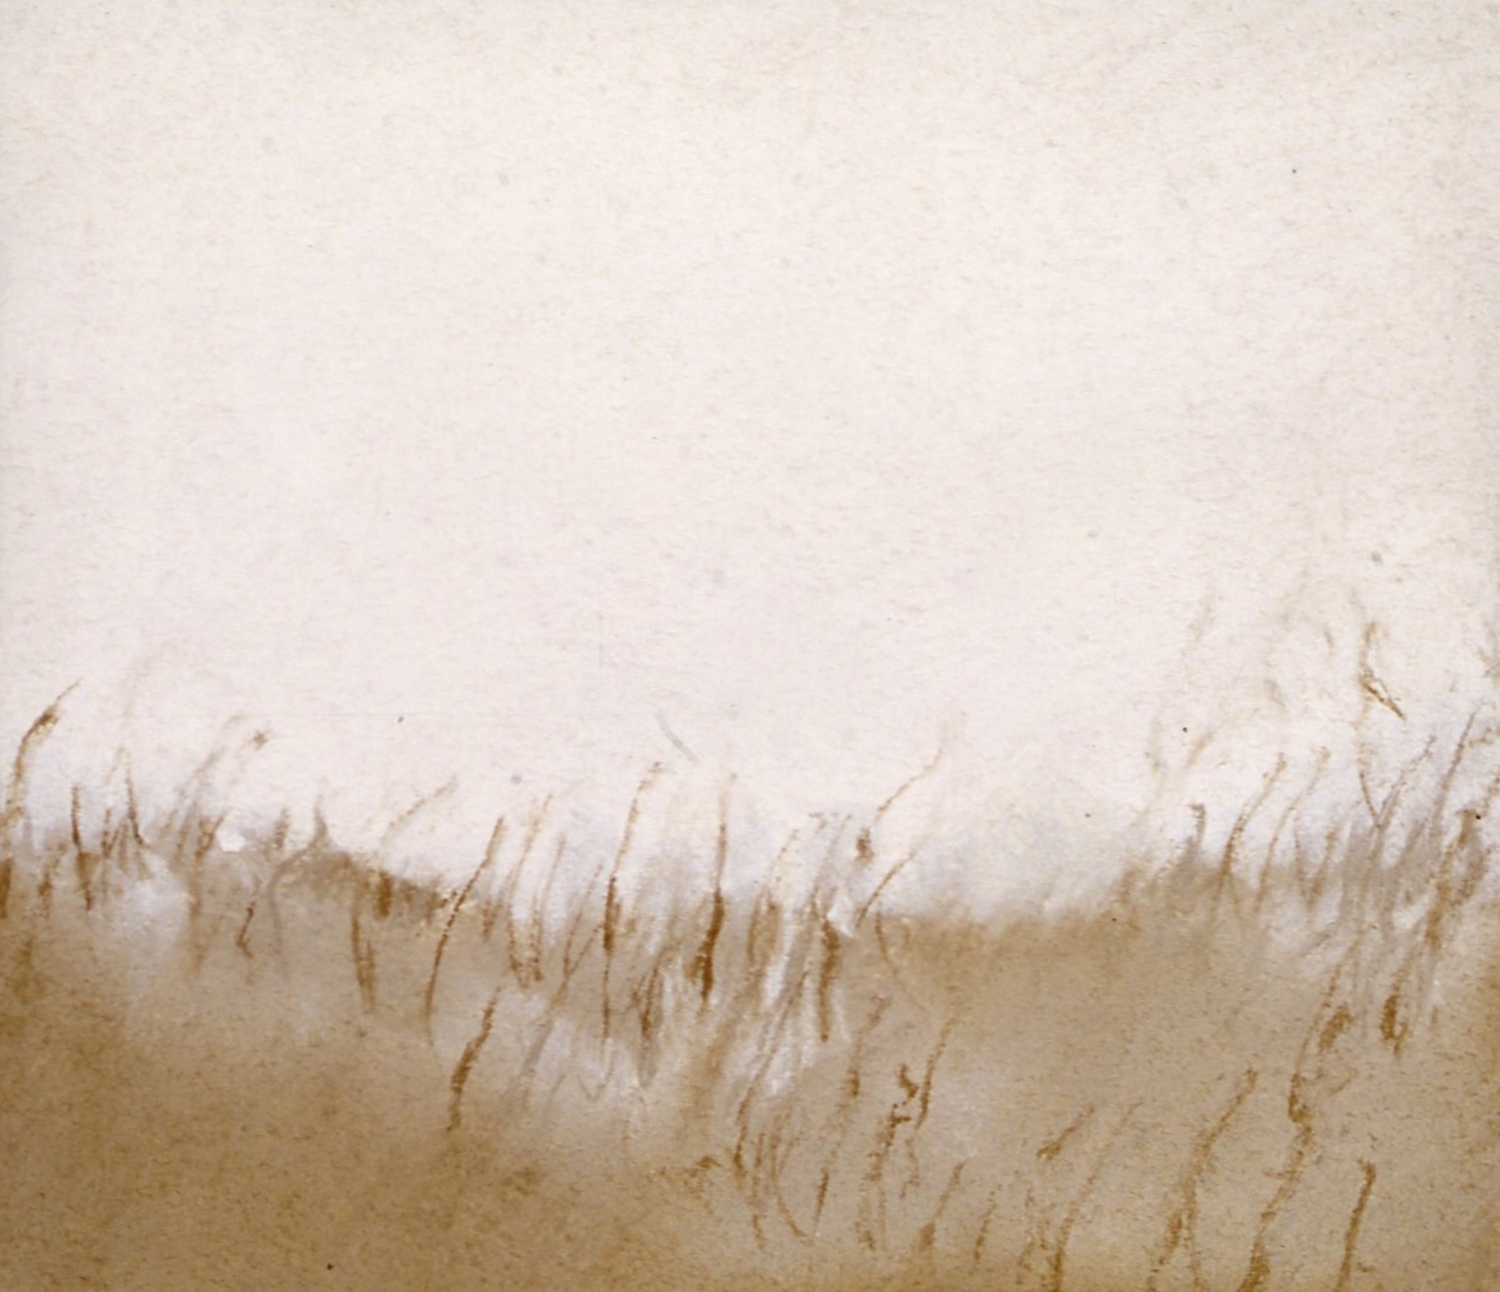 Jessica Masters, "Early work one," 1996, pastel on BFK Rives, 5 1/2 x 6 in. Private collection. Early work shows the simplicity in the division of the landscape and form. Painted with Yarka pastel.